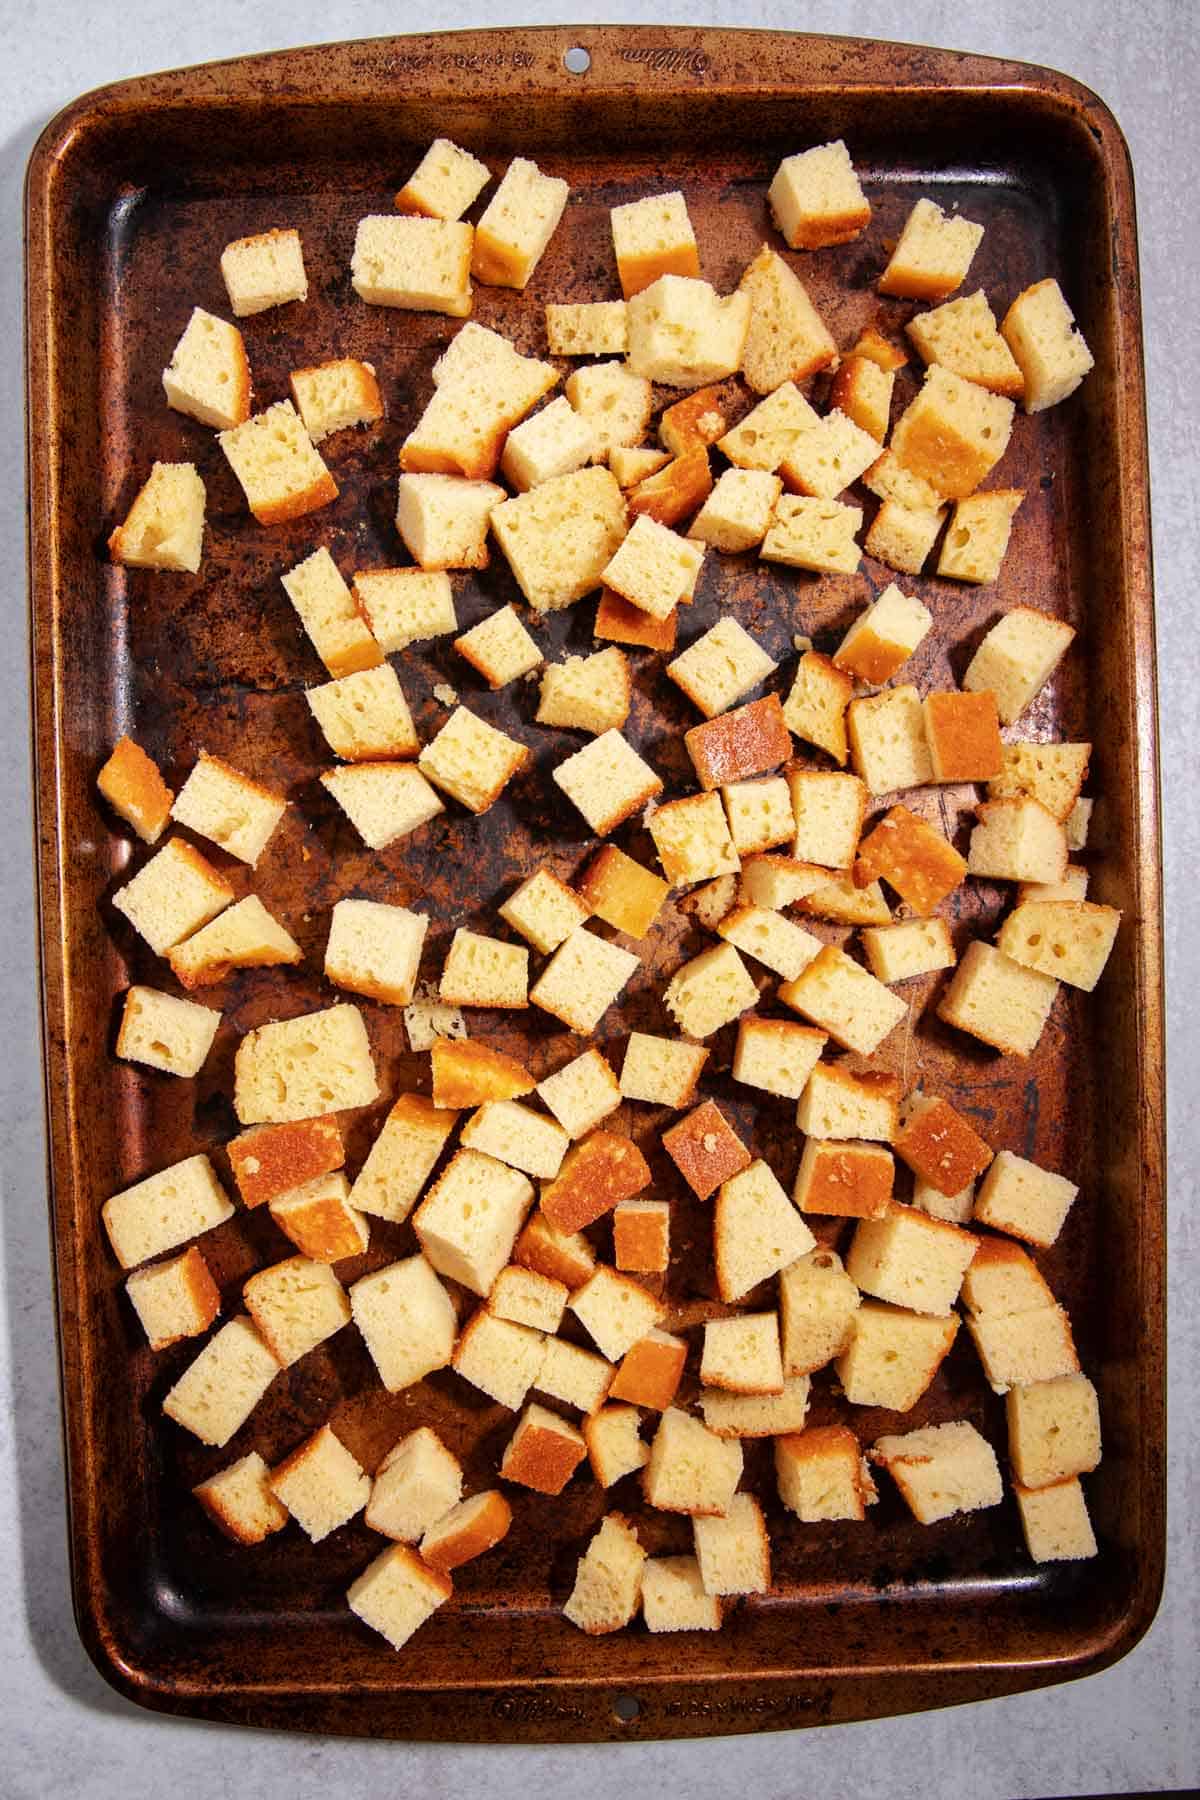 Cake cubes drying out on a baking sheet.